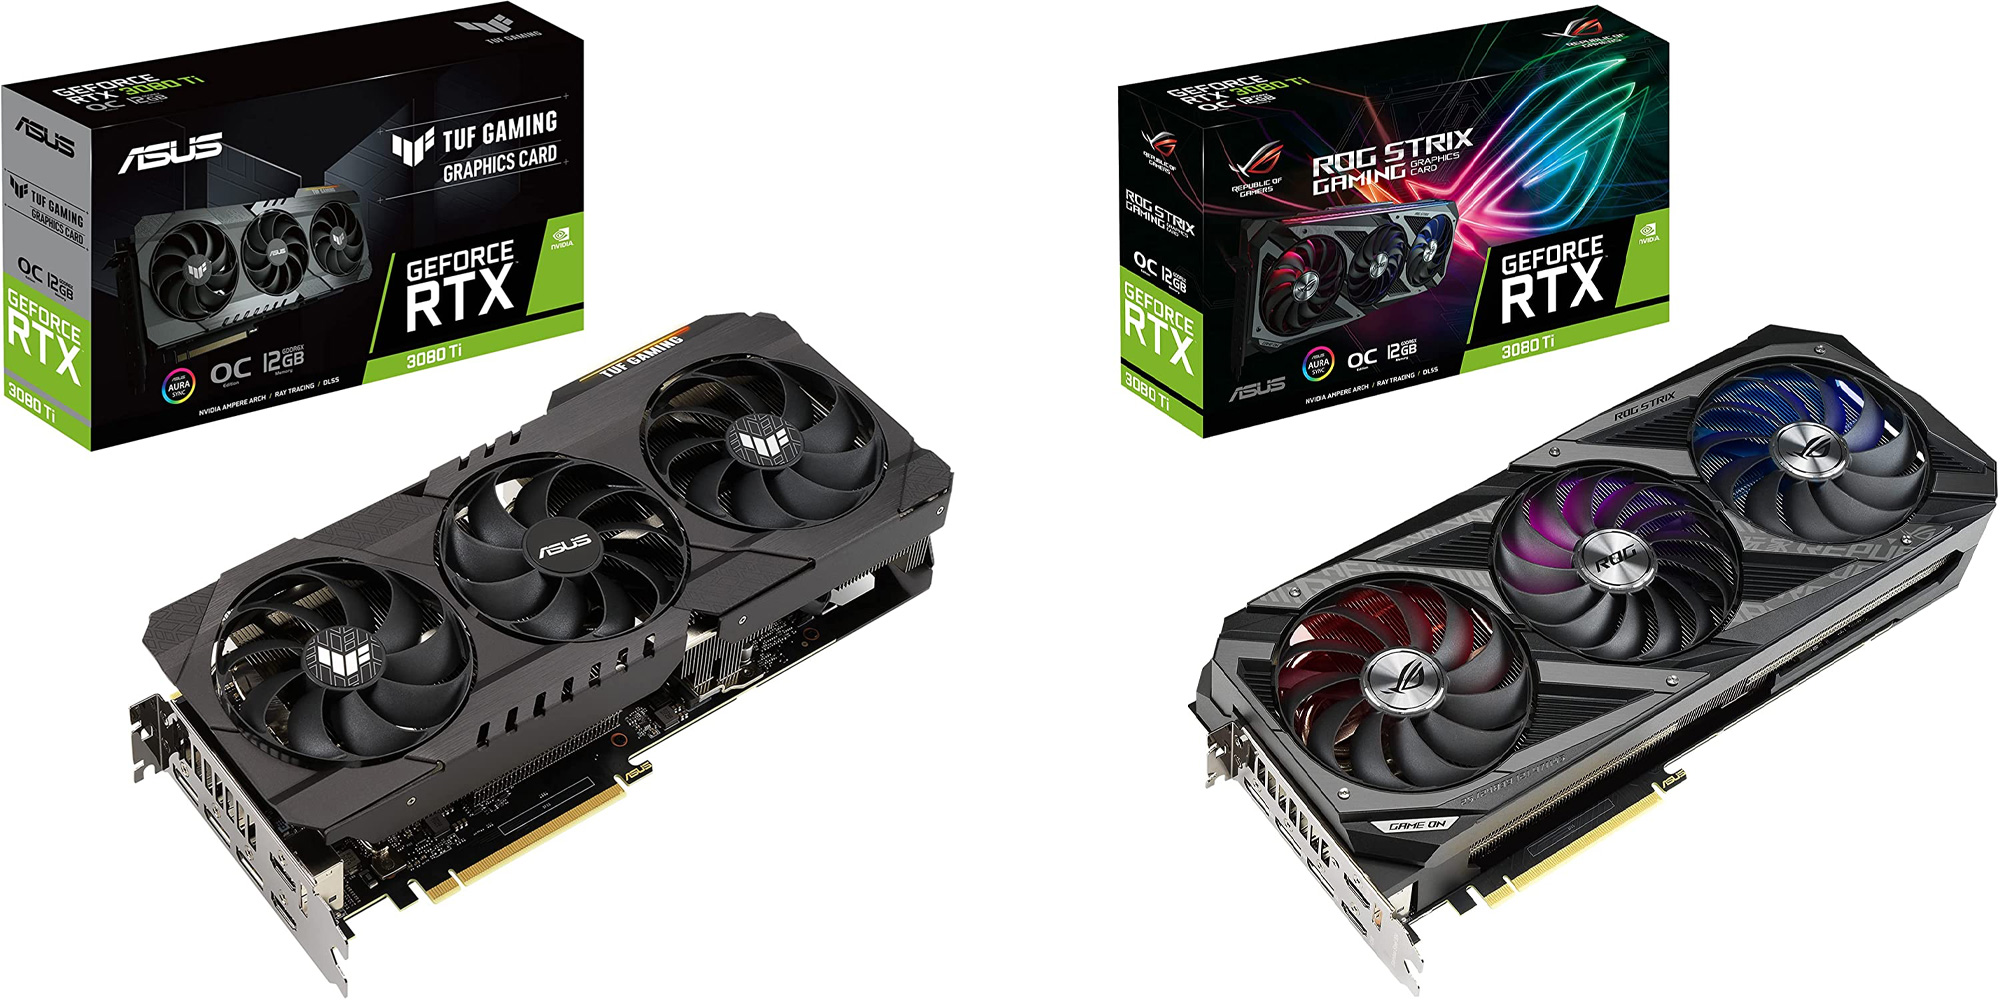 RTX 3080 Ti deal hits ASUS ROG Strix/TUF at $300 off, more - 9to5Toys